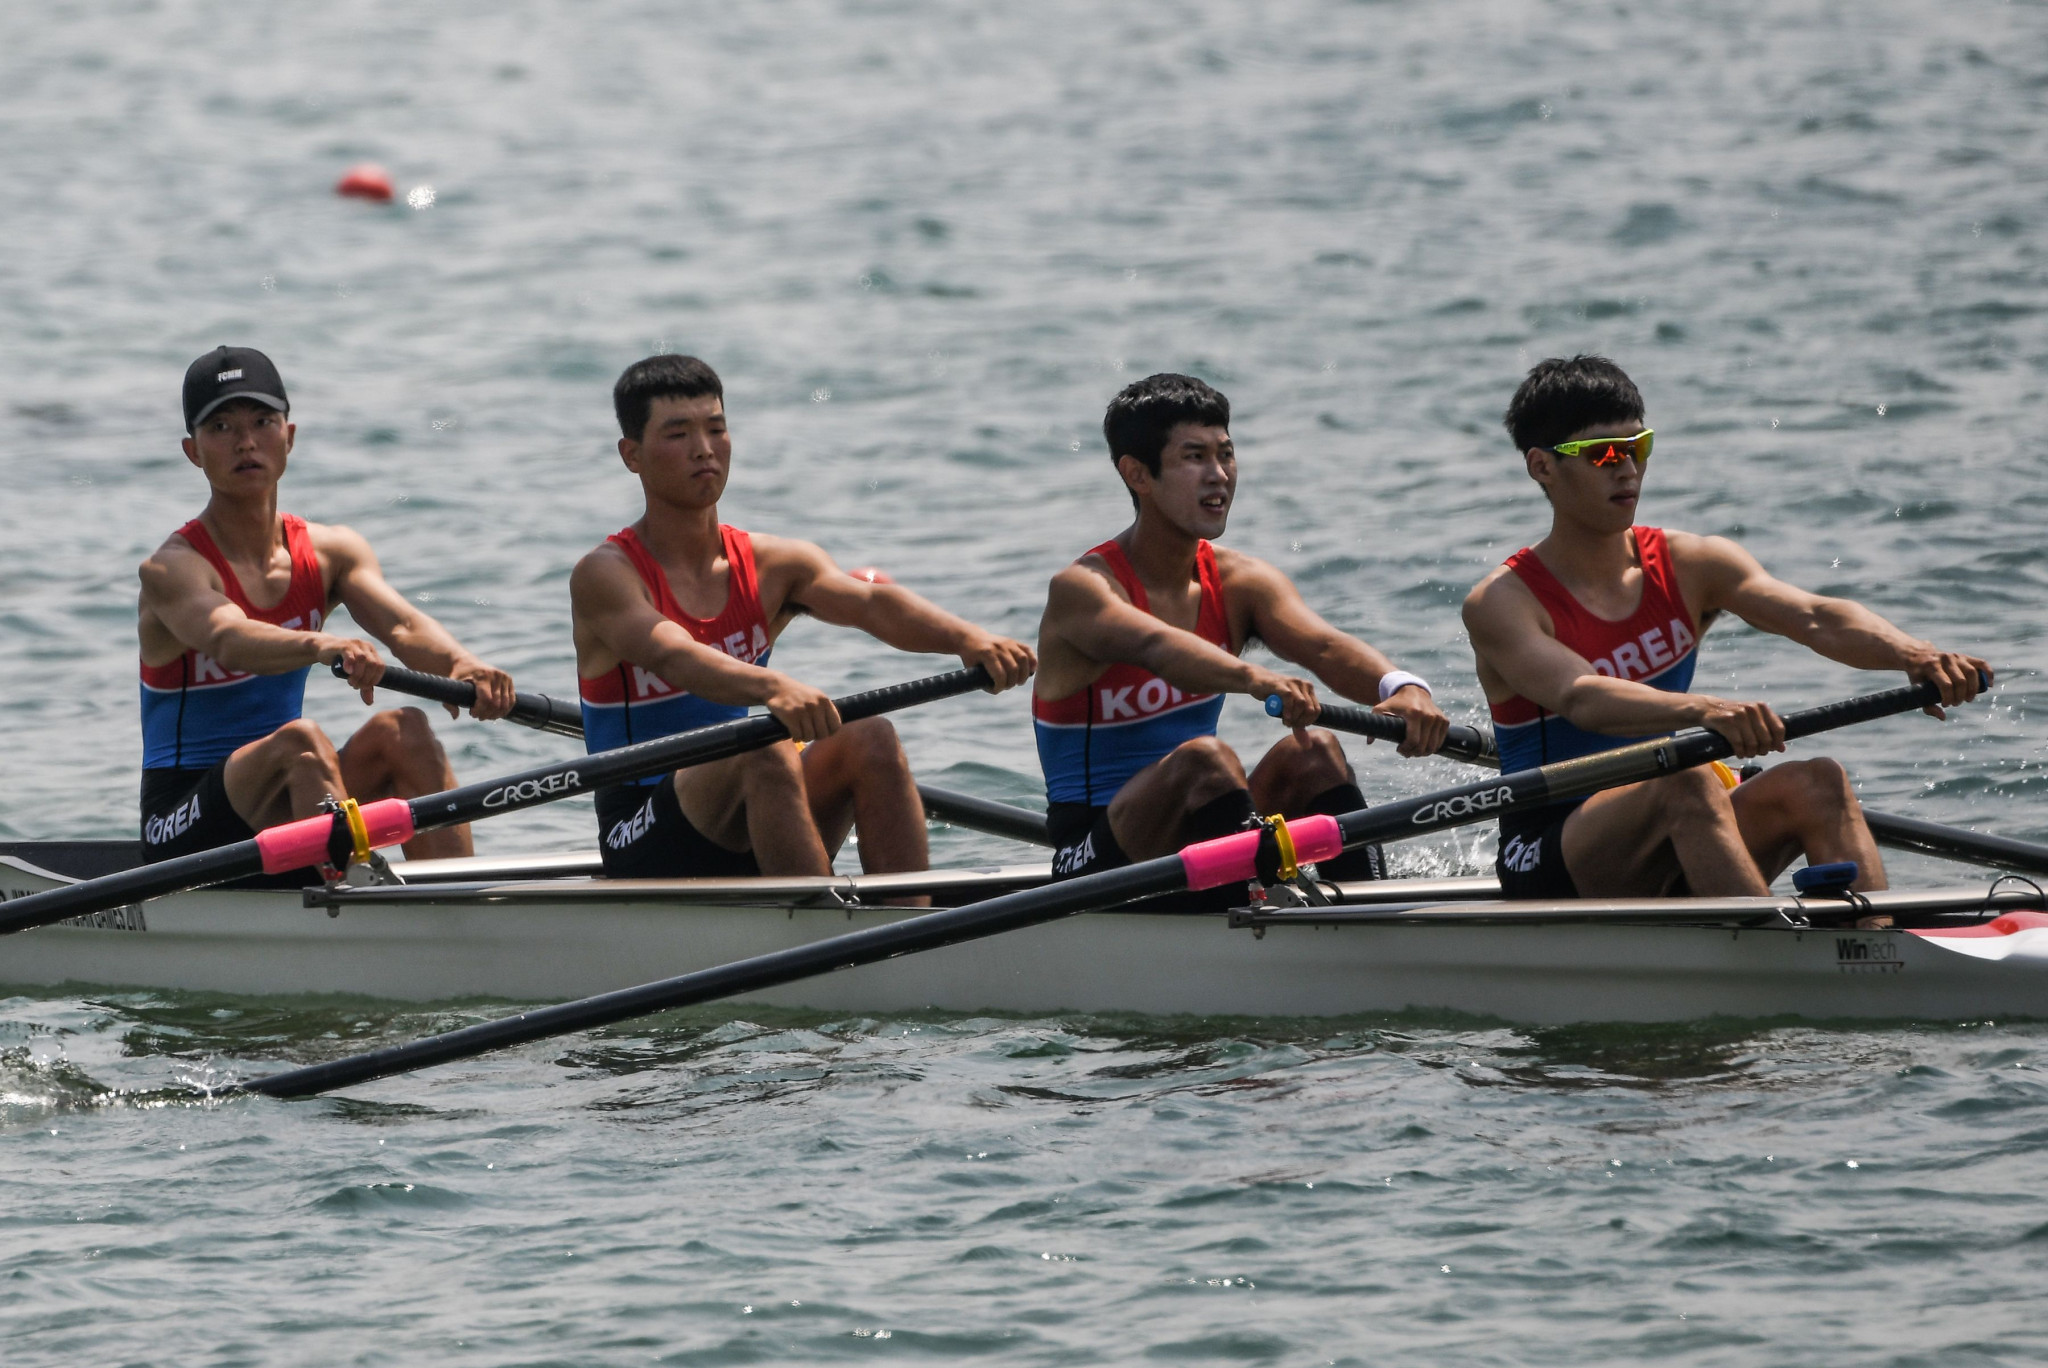 The two Korea's rowed together in the men's lightweight four heats, though it was an unimpressive debut. They finished last in their heat ©Getty Images